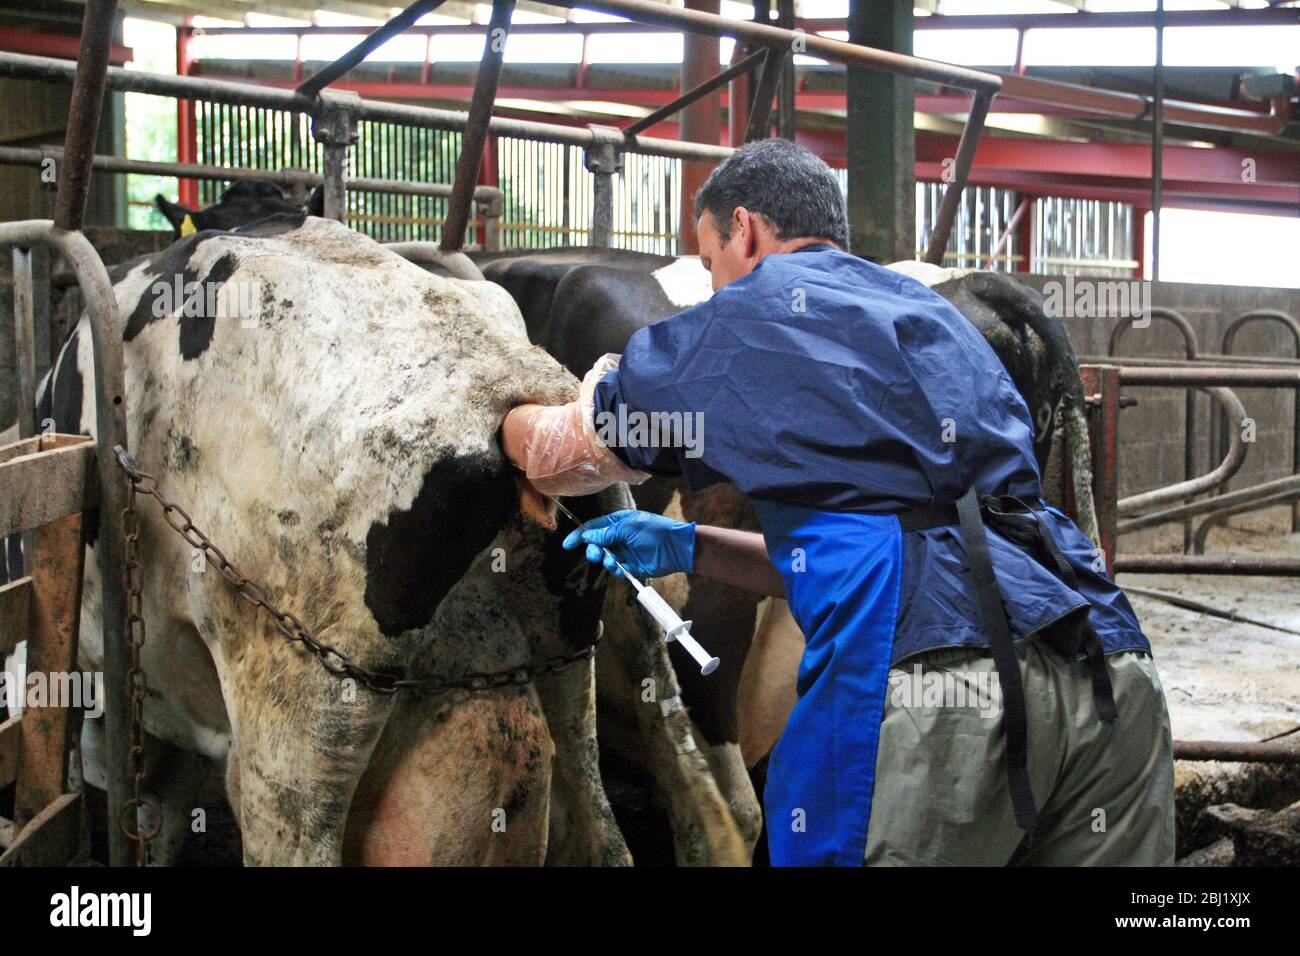 Vet examines cow in cattle shed Stock Photo